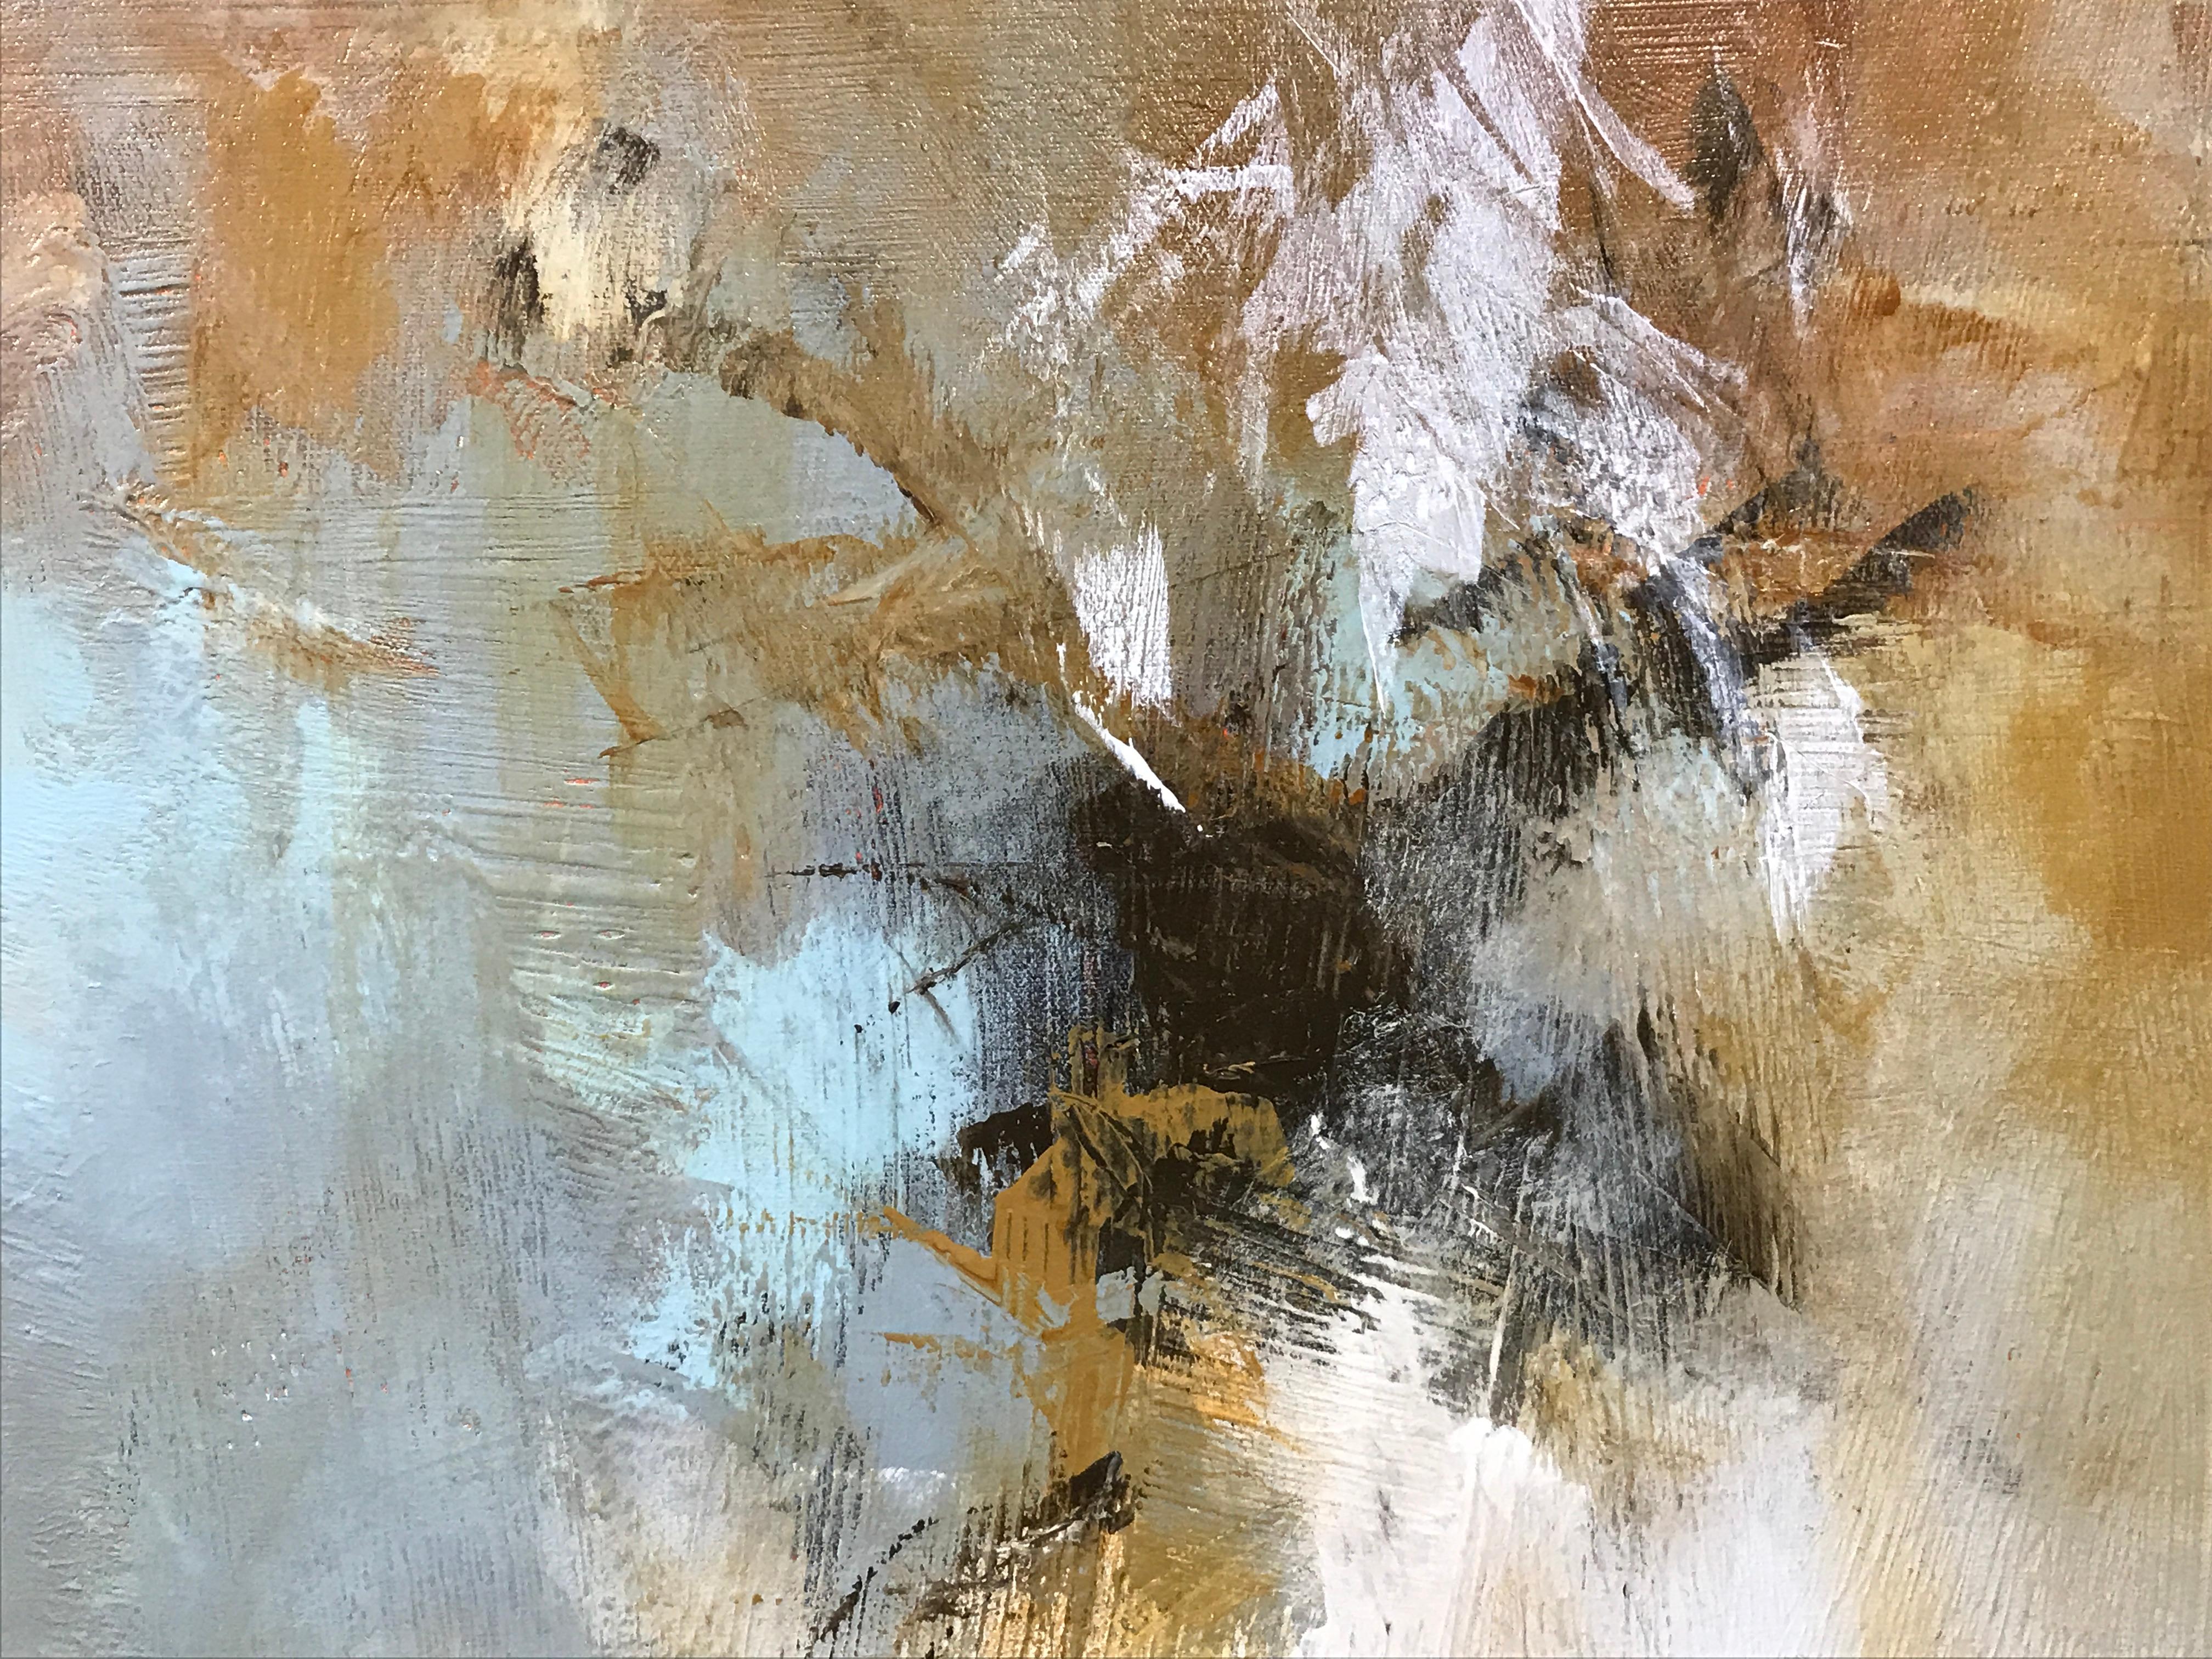 'Key Largo' is a large vertical abstract mixed media on canvas painting created by American artist Christina Doelling in 2019. Featuring an exquisite palette made of brown, turquoise, grey, white and black tones, the painting showcases energetic